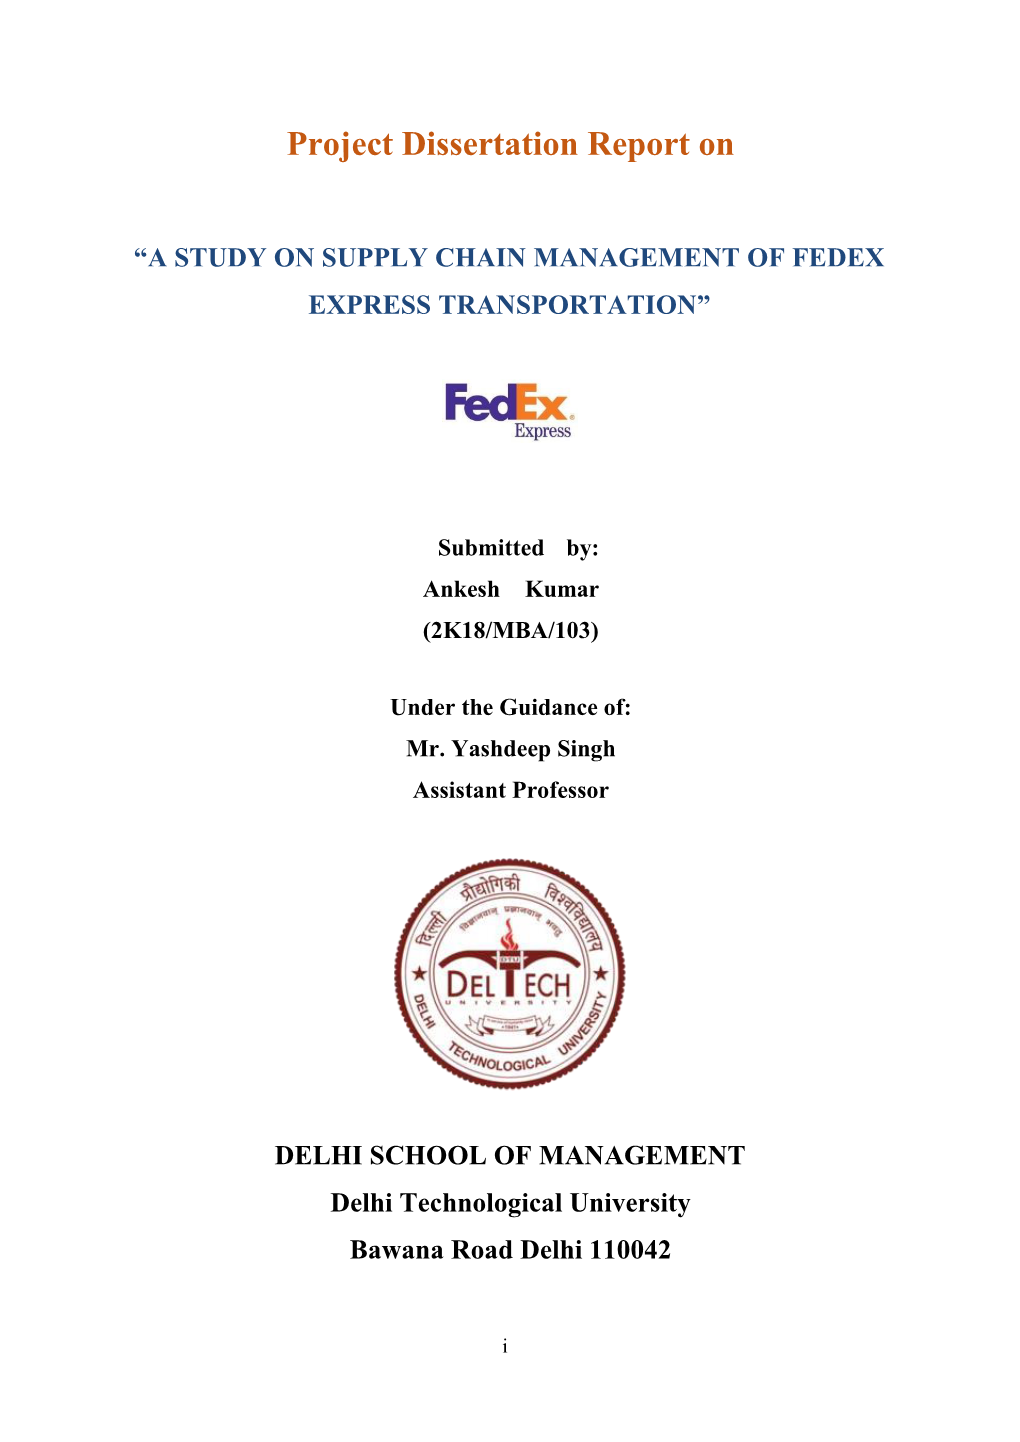 A Study on Supply Chain Management of Fedex Express Transportation”